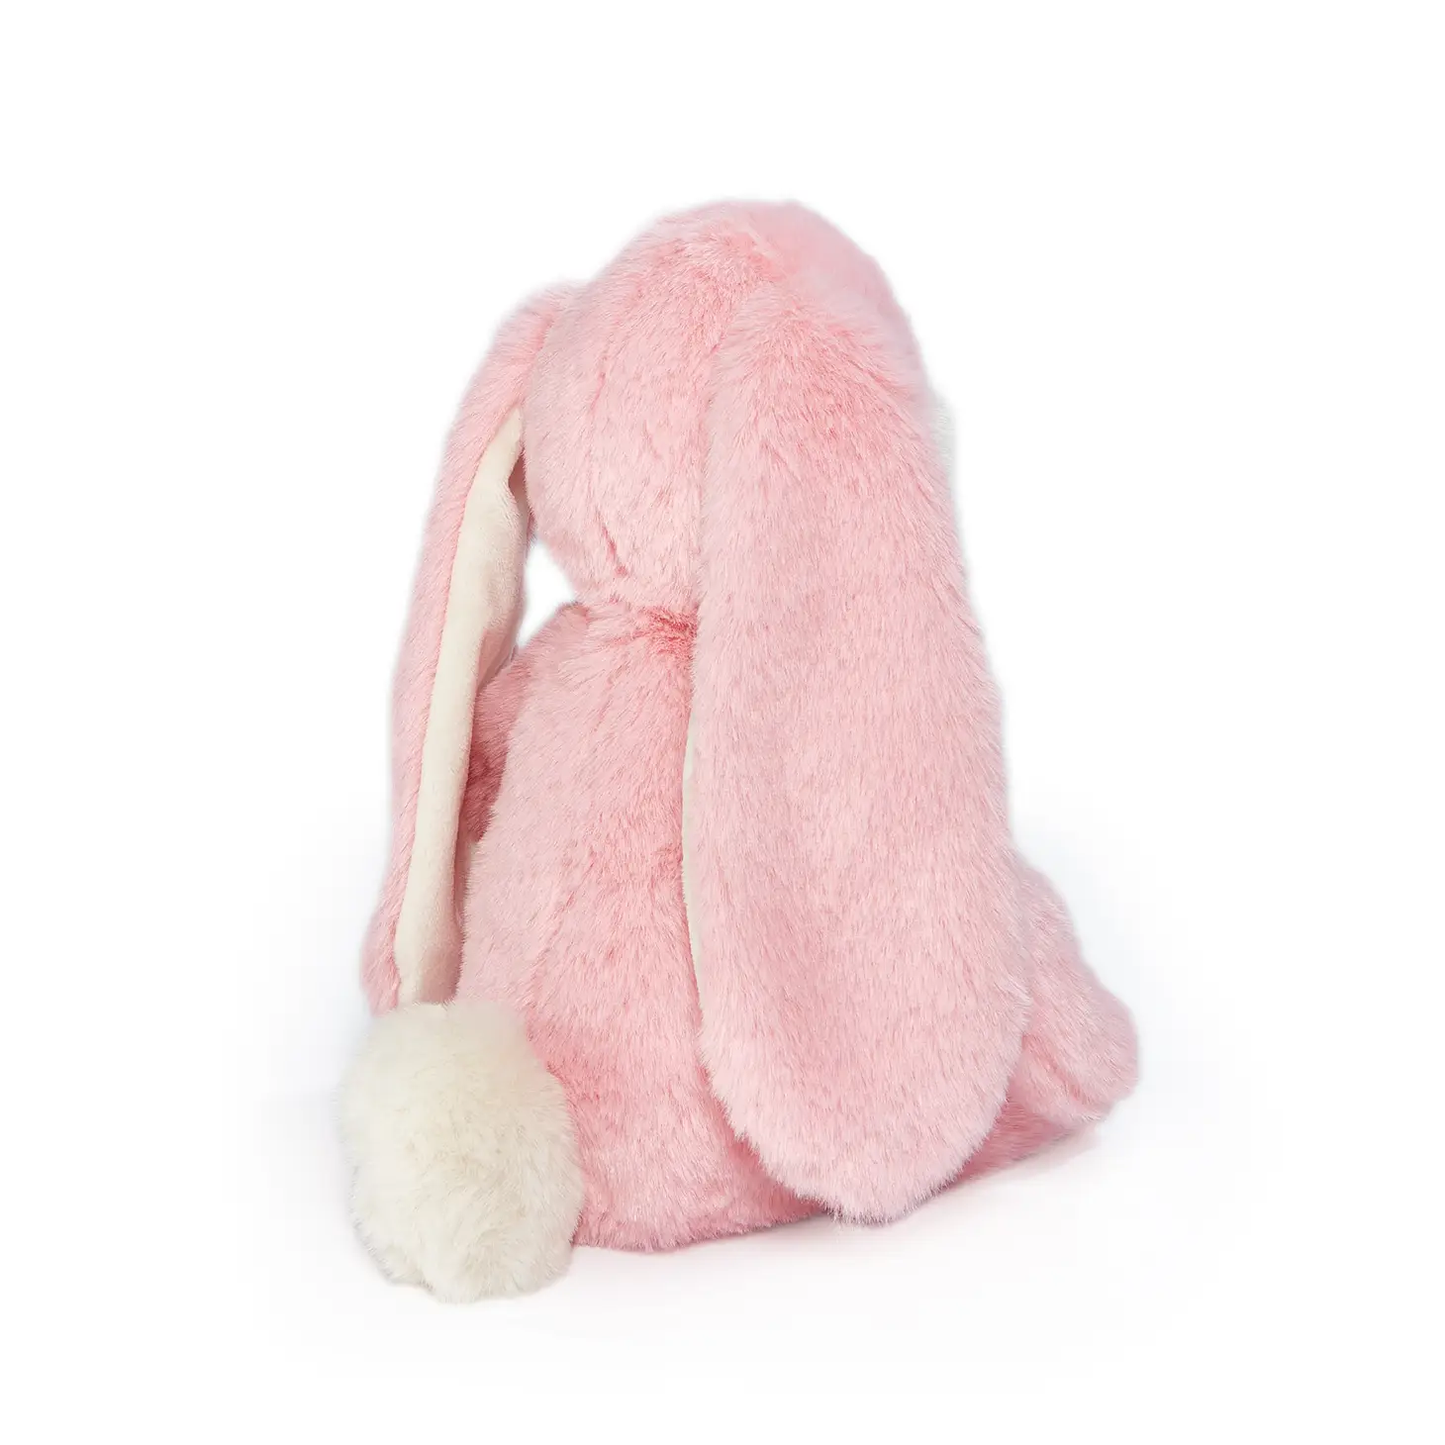 Little Nibble Bunny - Coral Blush